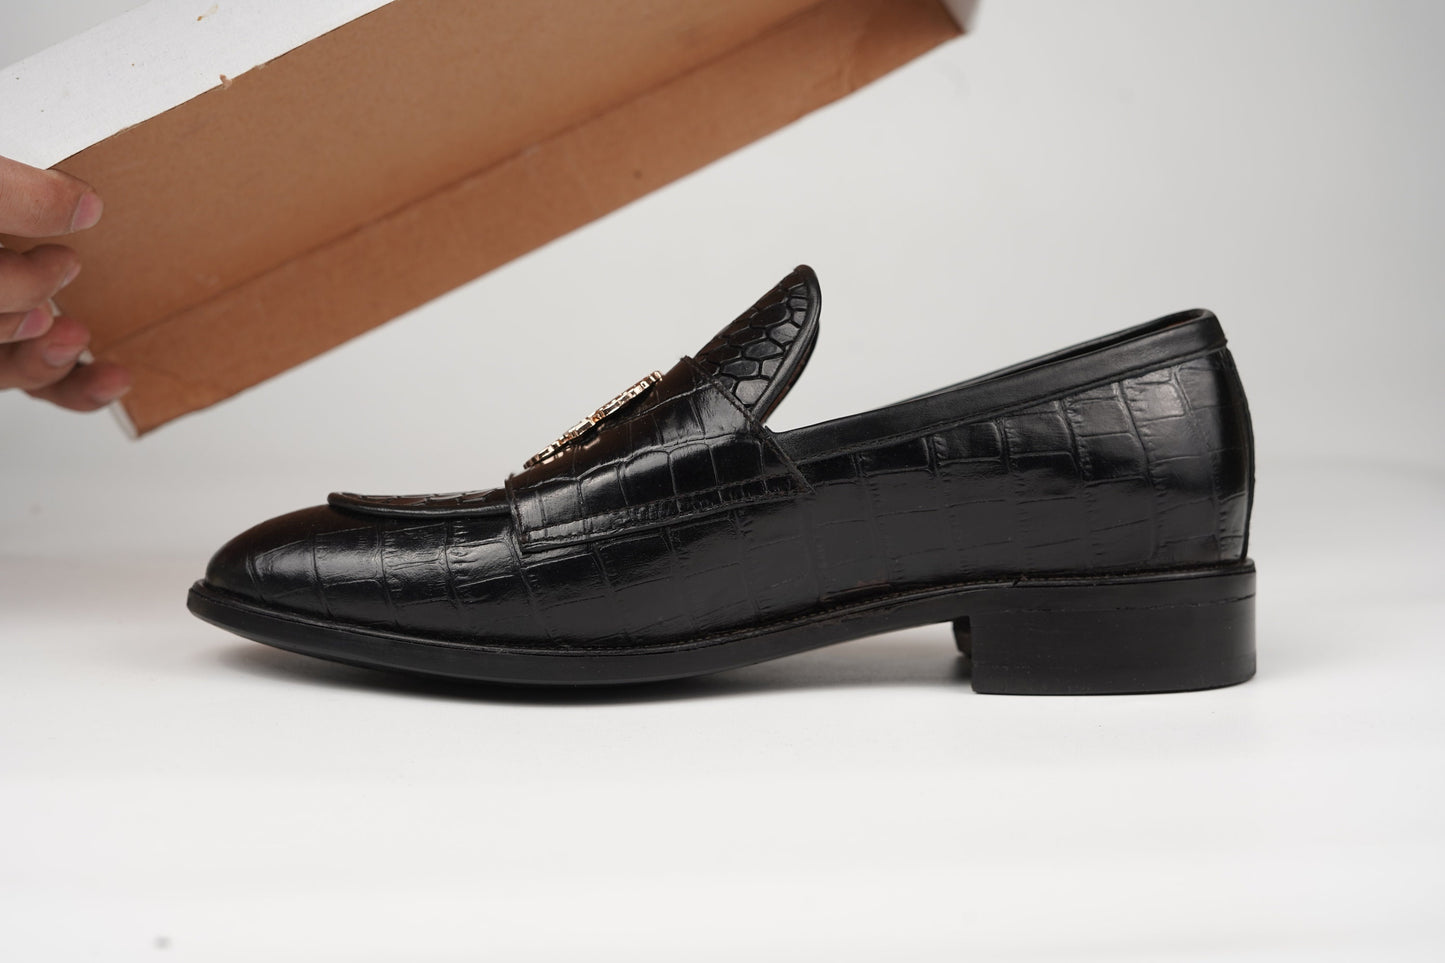 Black Double Buckle Loafer made using embossed Crocodile leather Custom Made-To-Order Shoes  Premium Quality Handmade Woozy Store